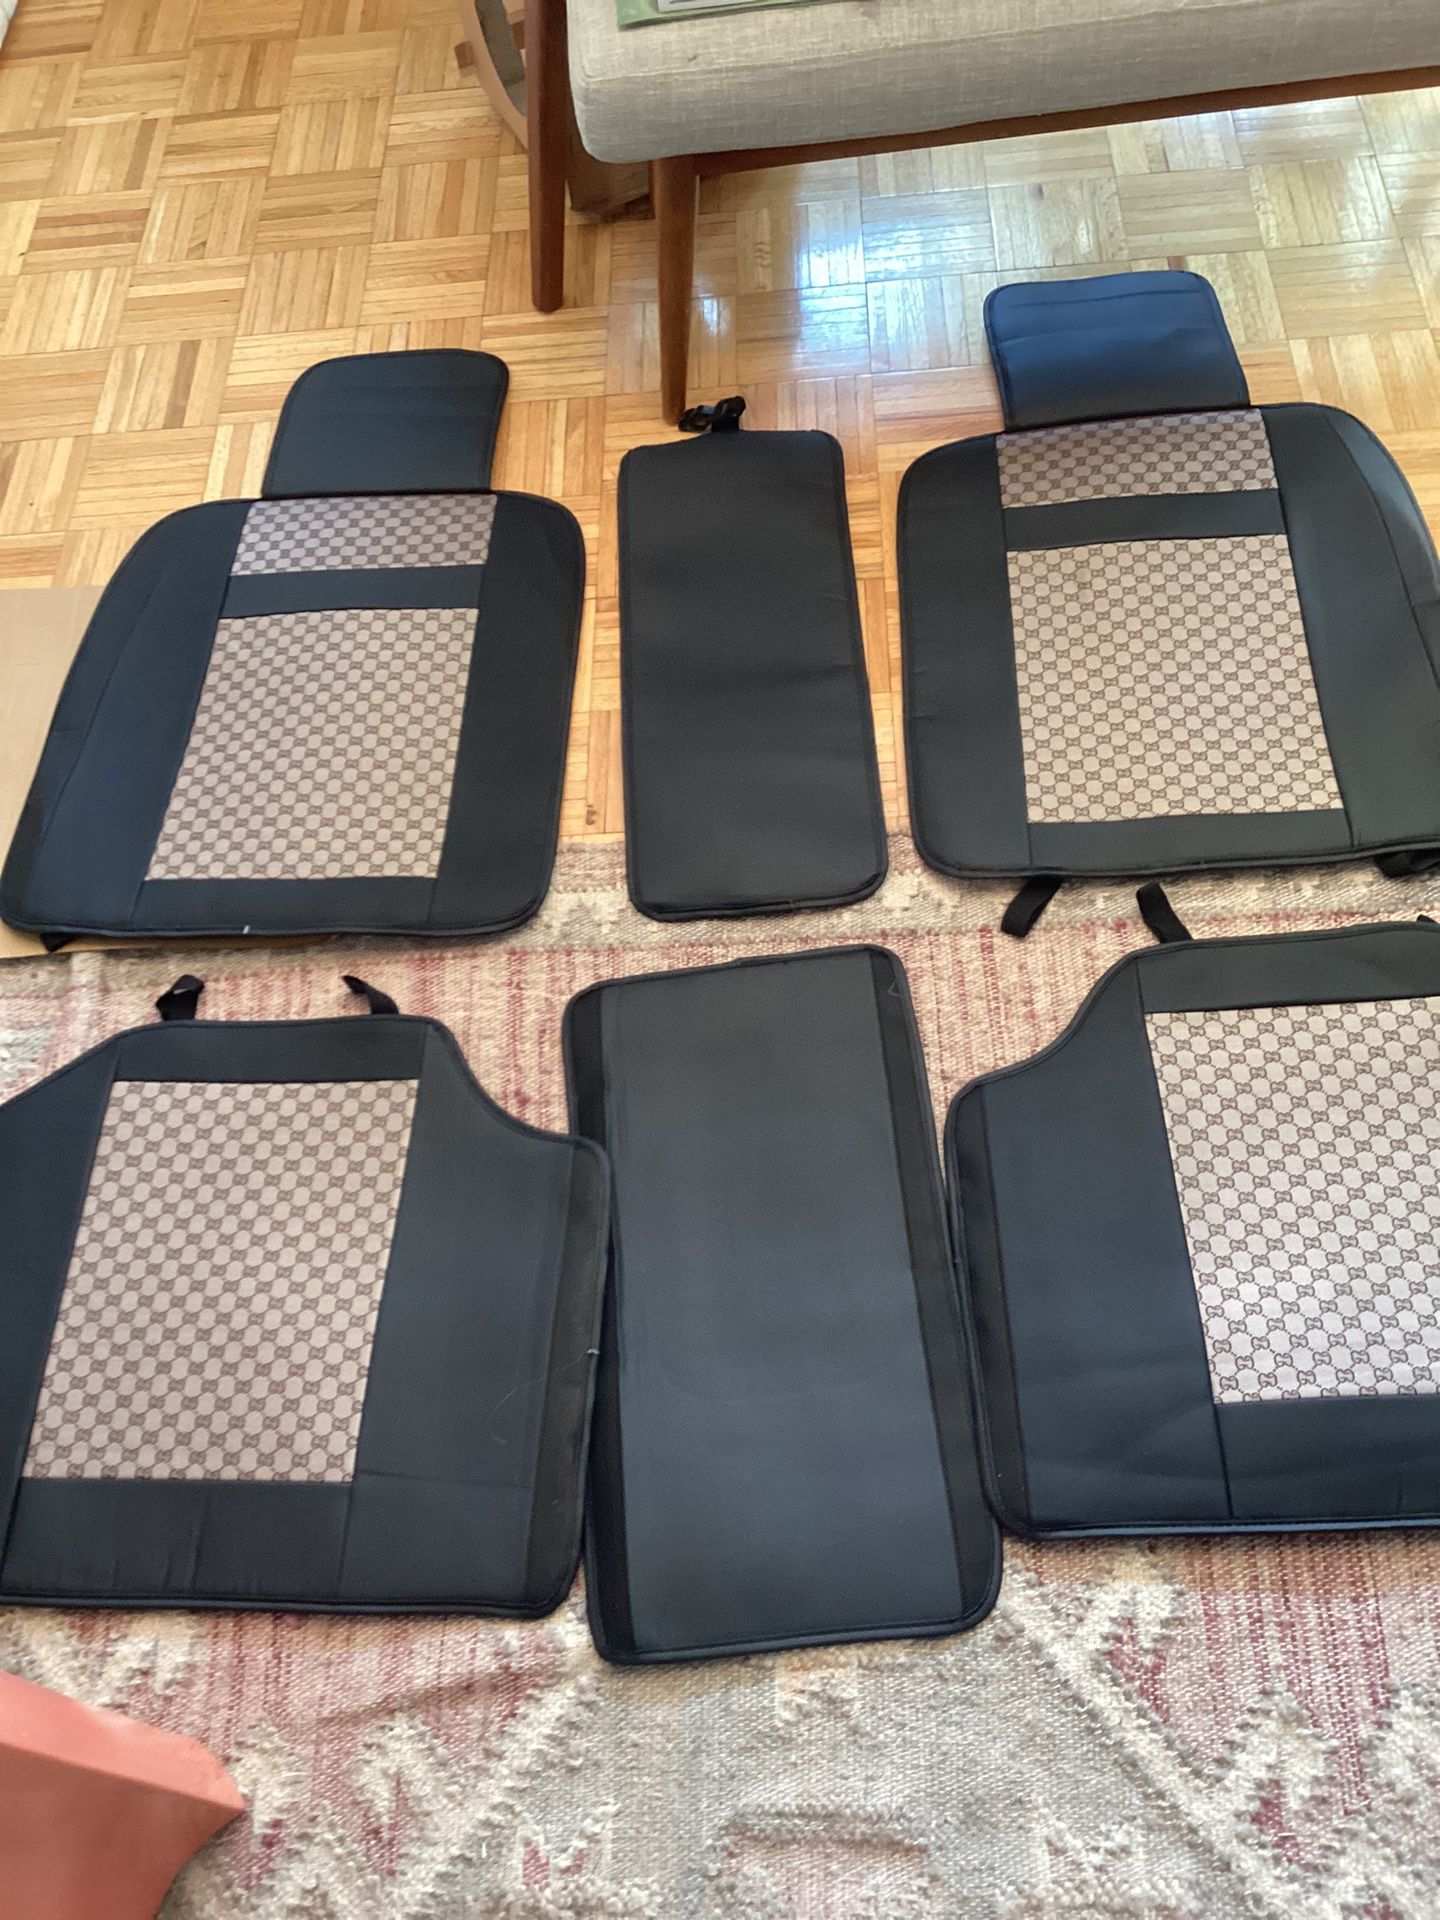 Full set front and back seat mock Gucci car seat covers